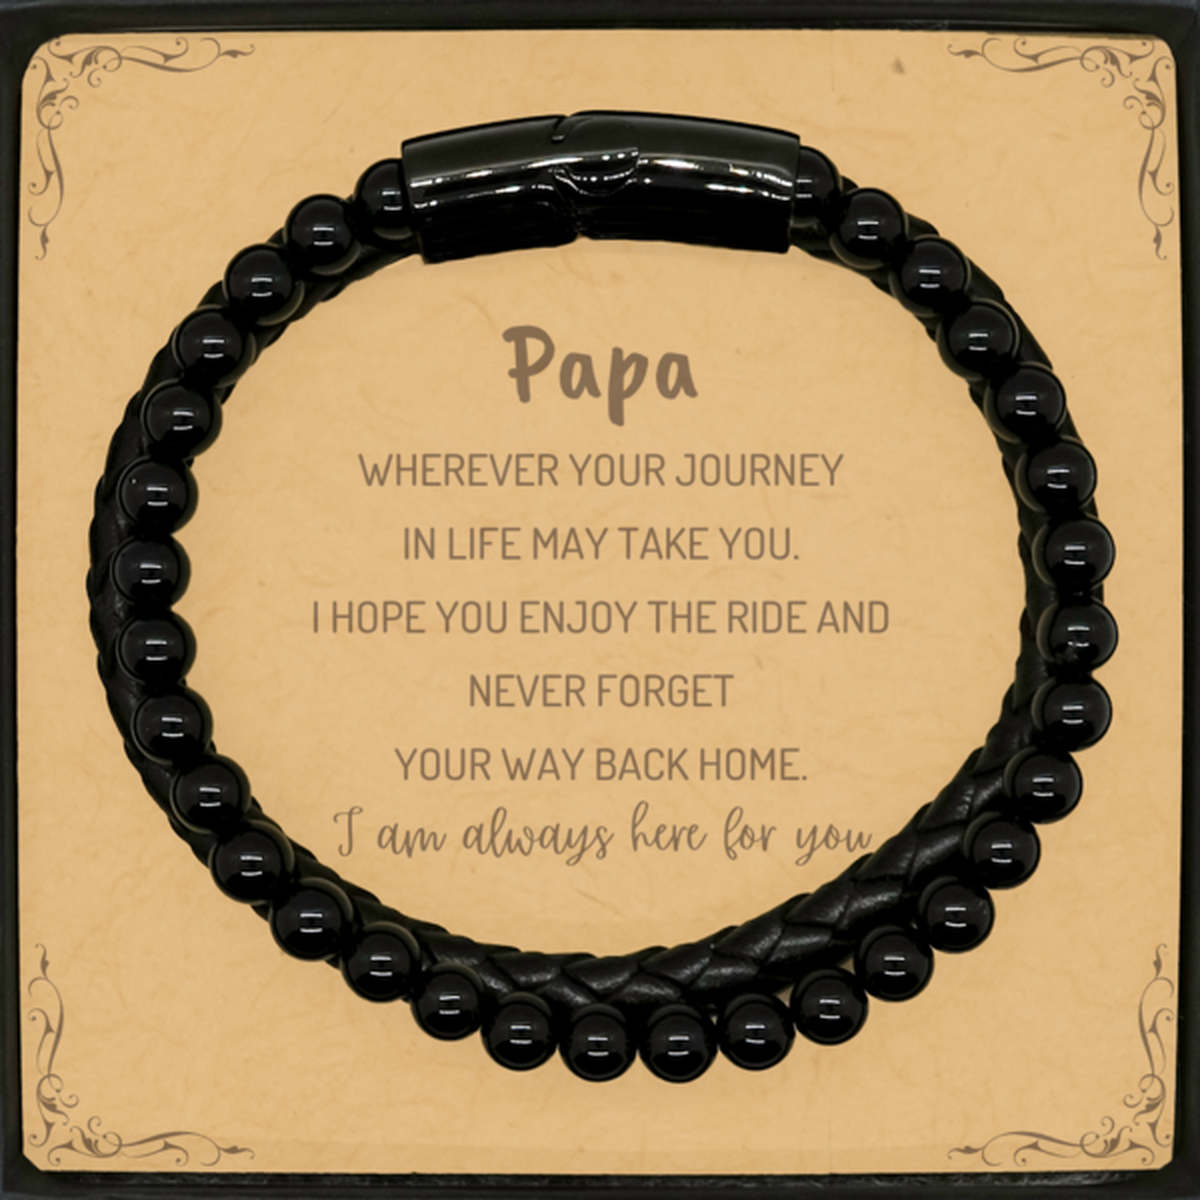 Papa wherever your journey in life may take you, I am always here for you Papa Stone Leather Bracelets, Awesome Christmas Gifts For Papa Message Card, Papa Birthday Gifts for Men Women Family Loved One